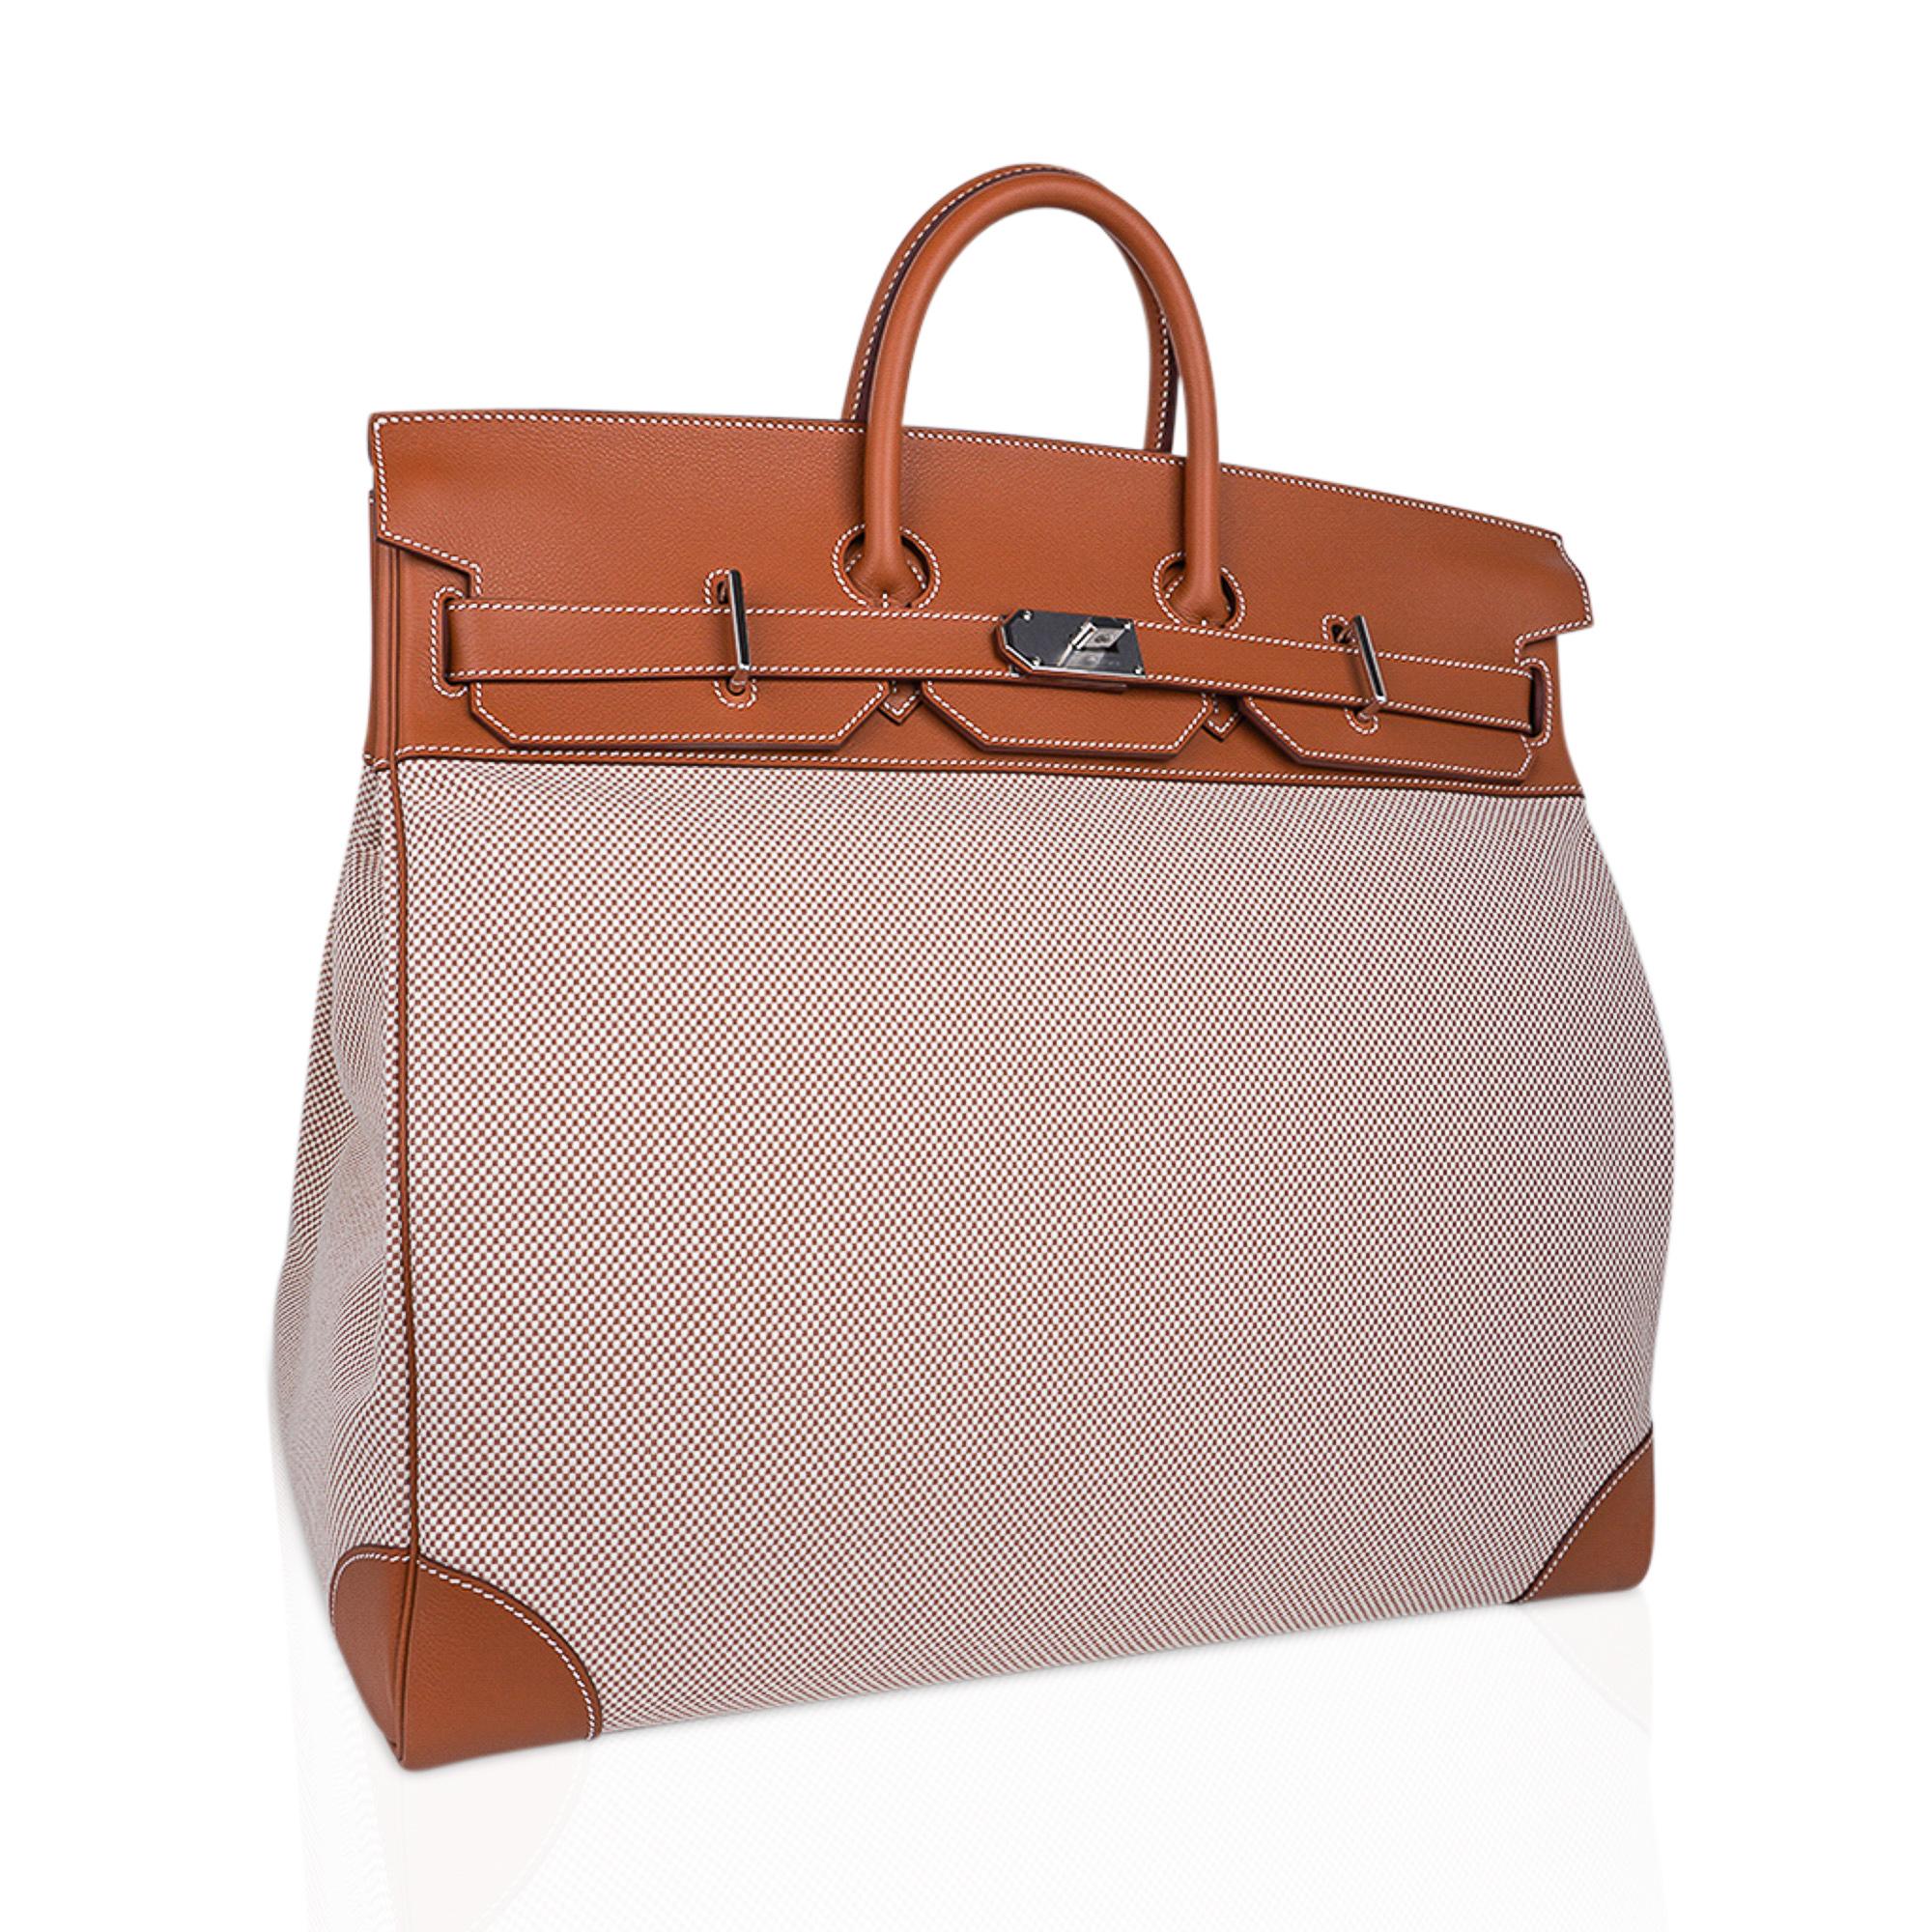 Mightychic offers a rare Hermes 50 Hac bag (Haut a Courroies) featured in Gold.
Beautiful in Gold Evercolor leather and Criss Cross Viking Toile in Beige and Ecru.
Palladium hardware.
Chic and timeless.
This beautiful travel bag is a true Hermes